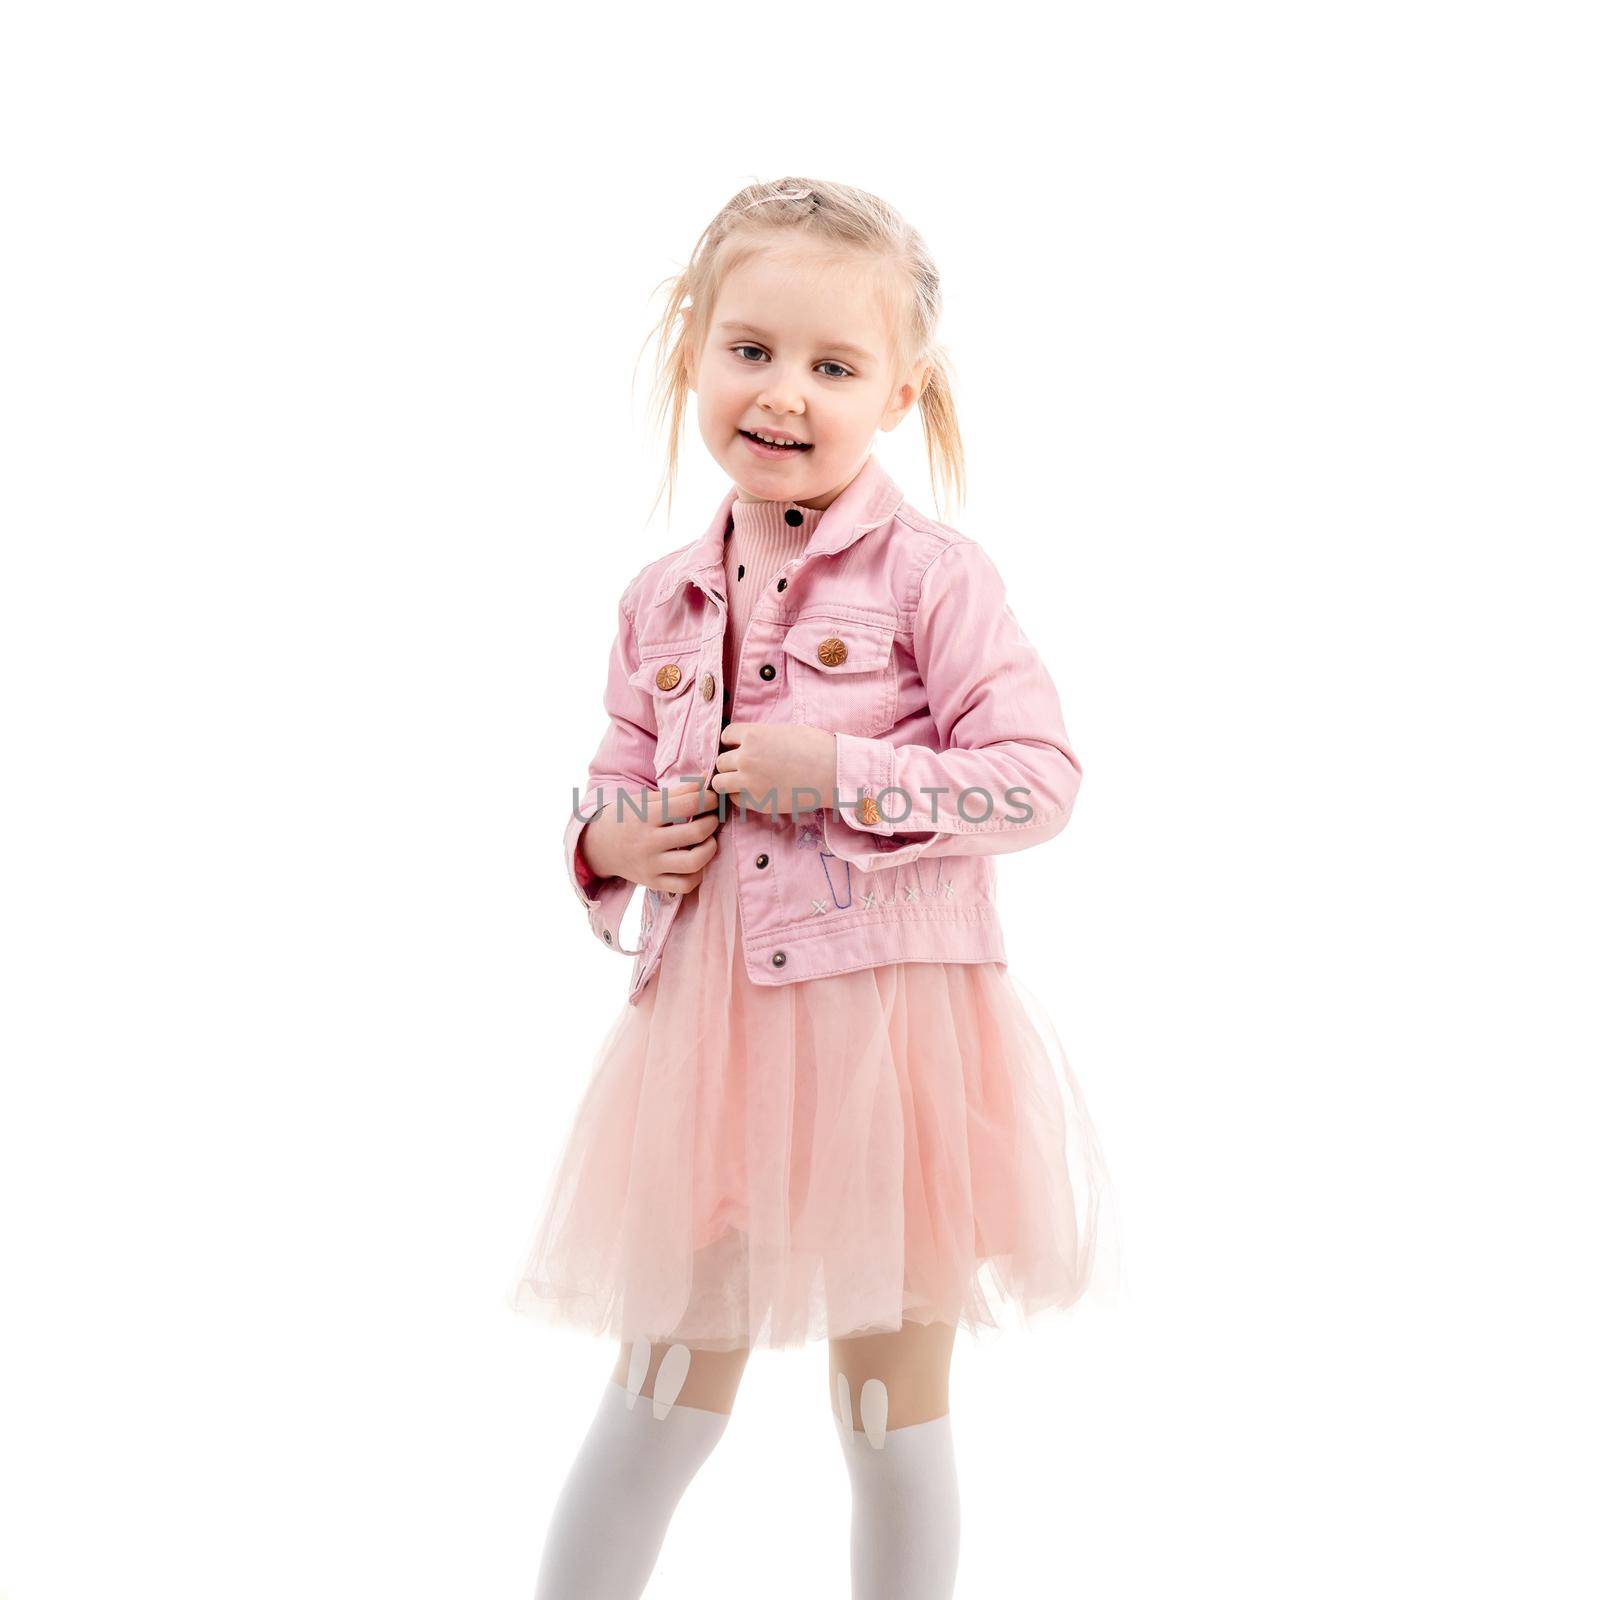 Sweet kid smiling and holding her pink jacket, wearing puffy skirt and white stockings, isolated